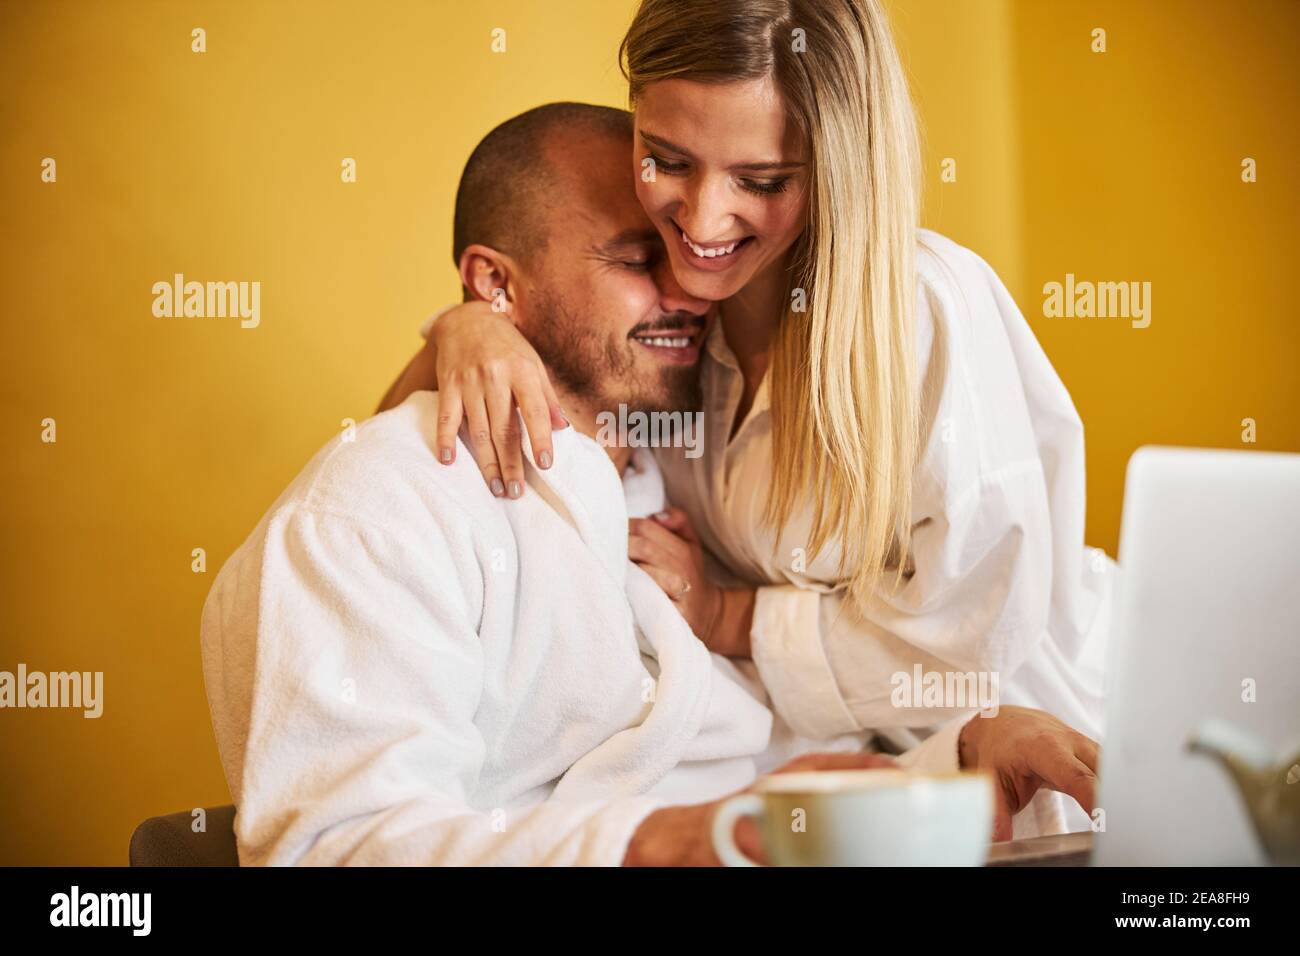 Cheerful wife distracting her husband from work Stock Photo